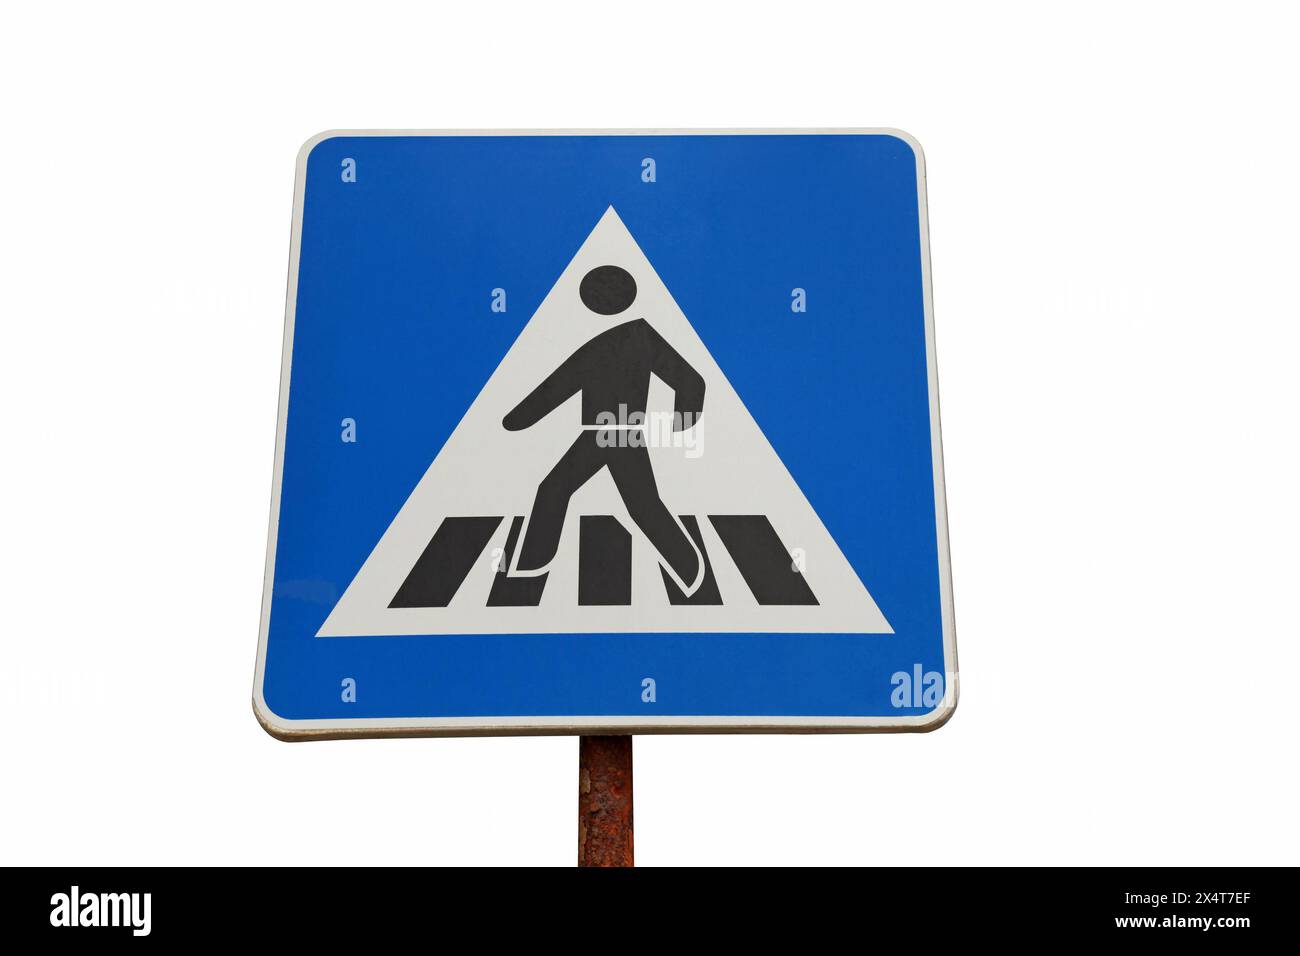 A blue pedestrian crossing sign isolated on white Stock Photo